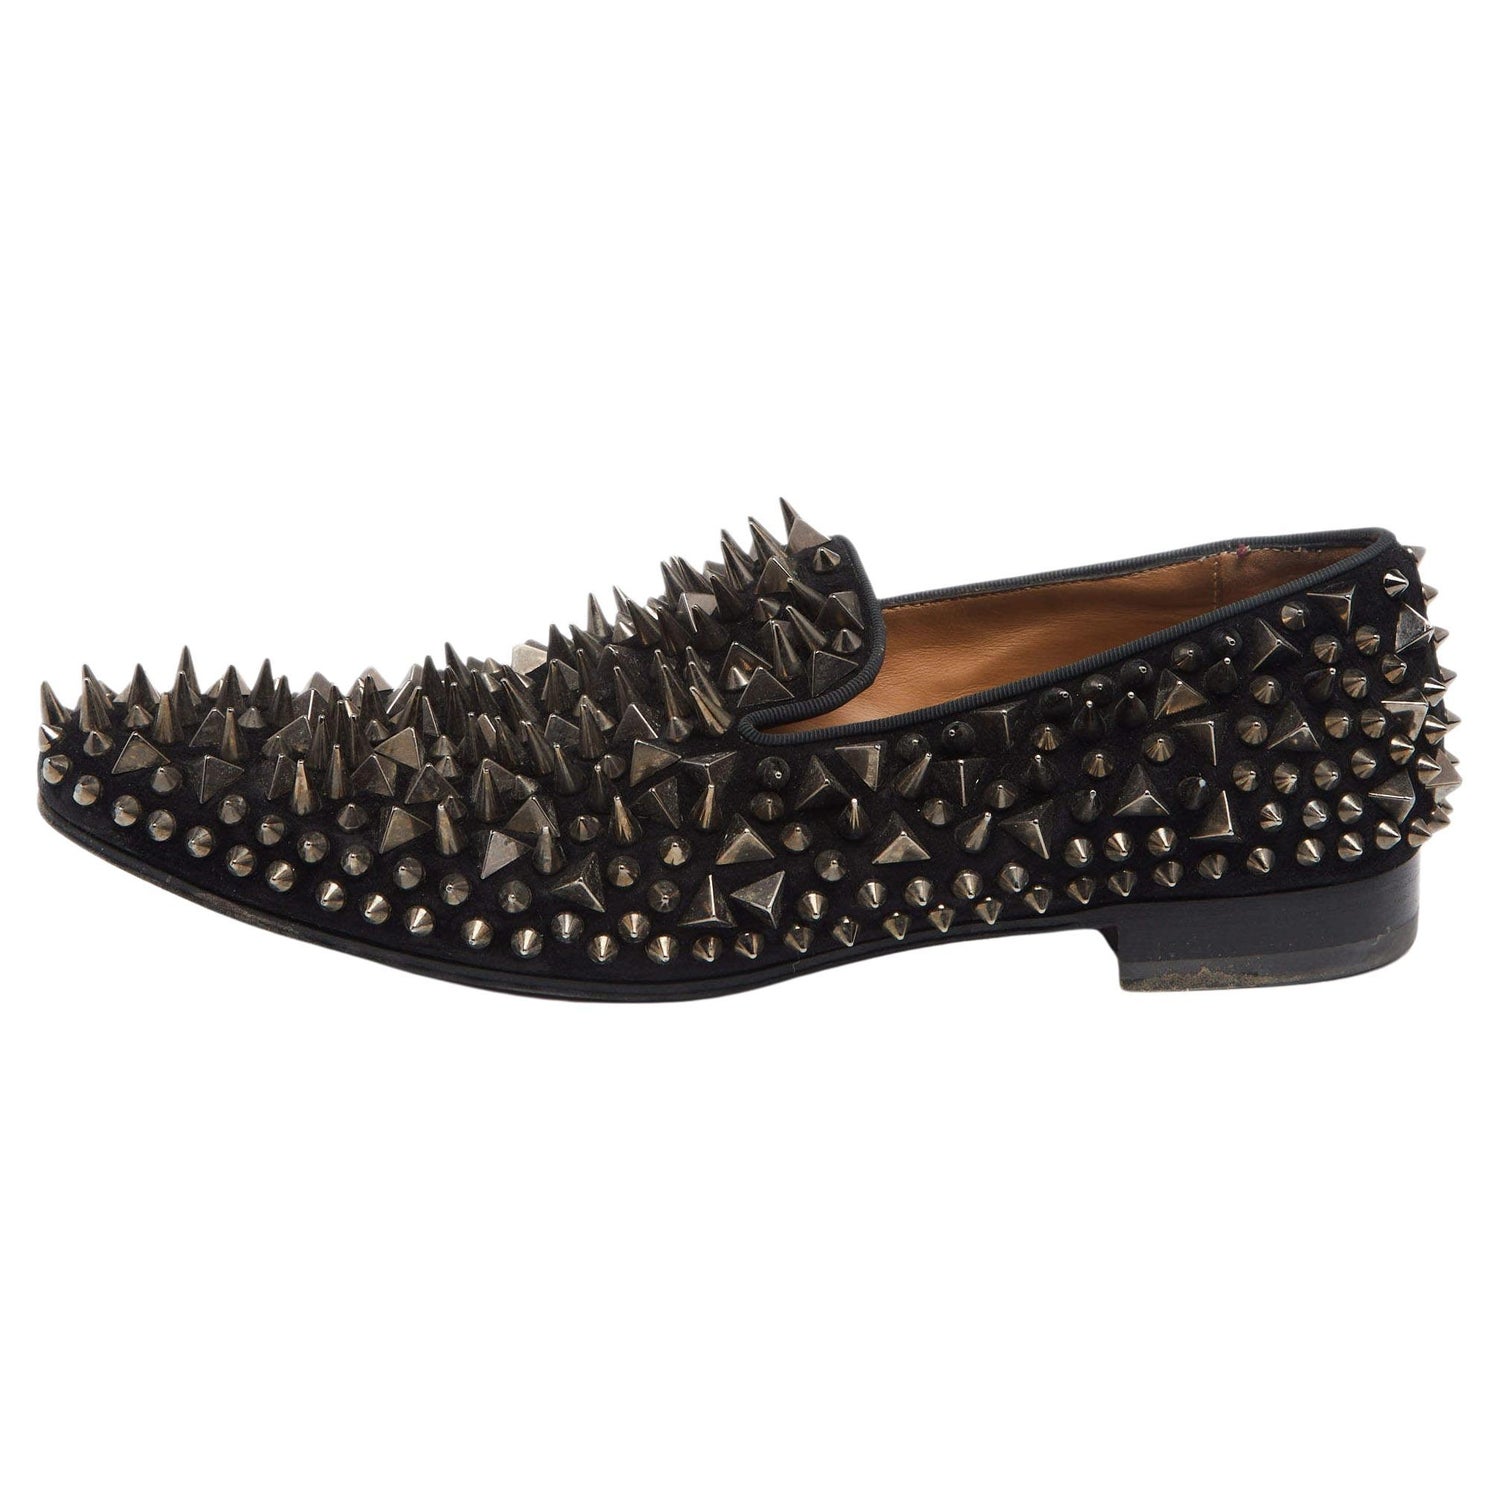 Christian Louboutin, Shoes, Louboutin Beige Rolling Spikes Suede Loafers